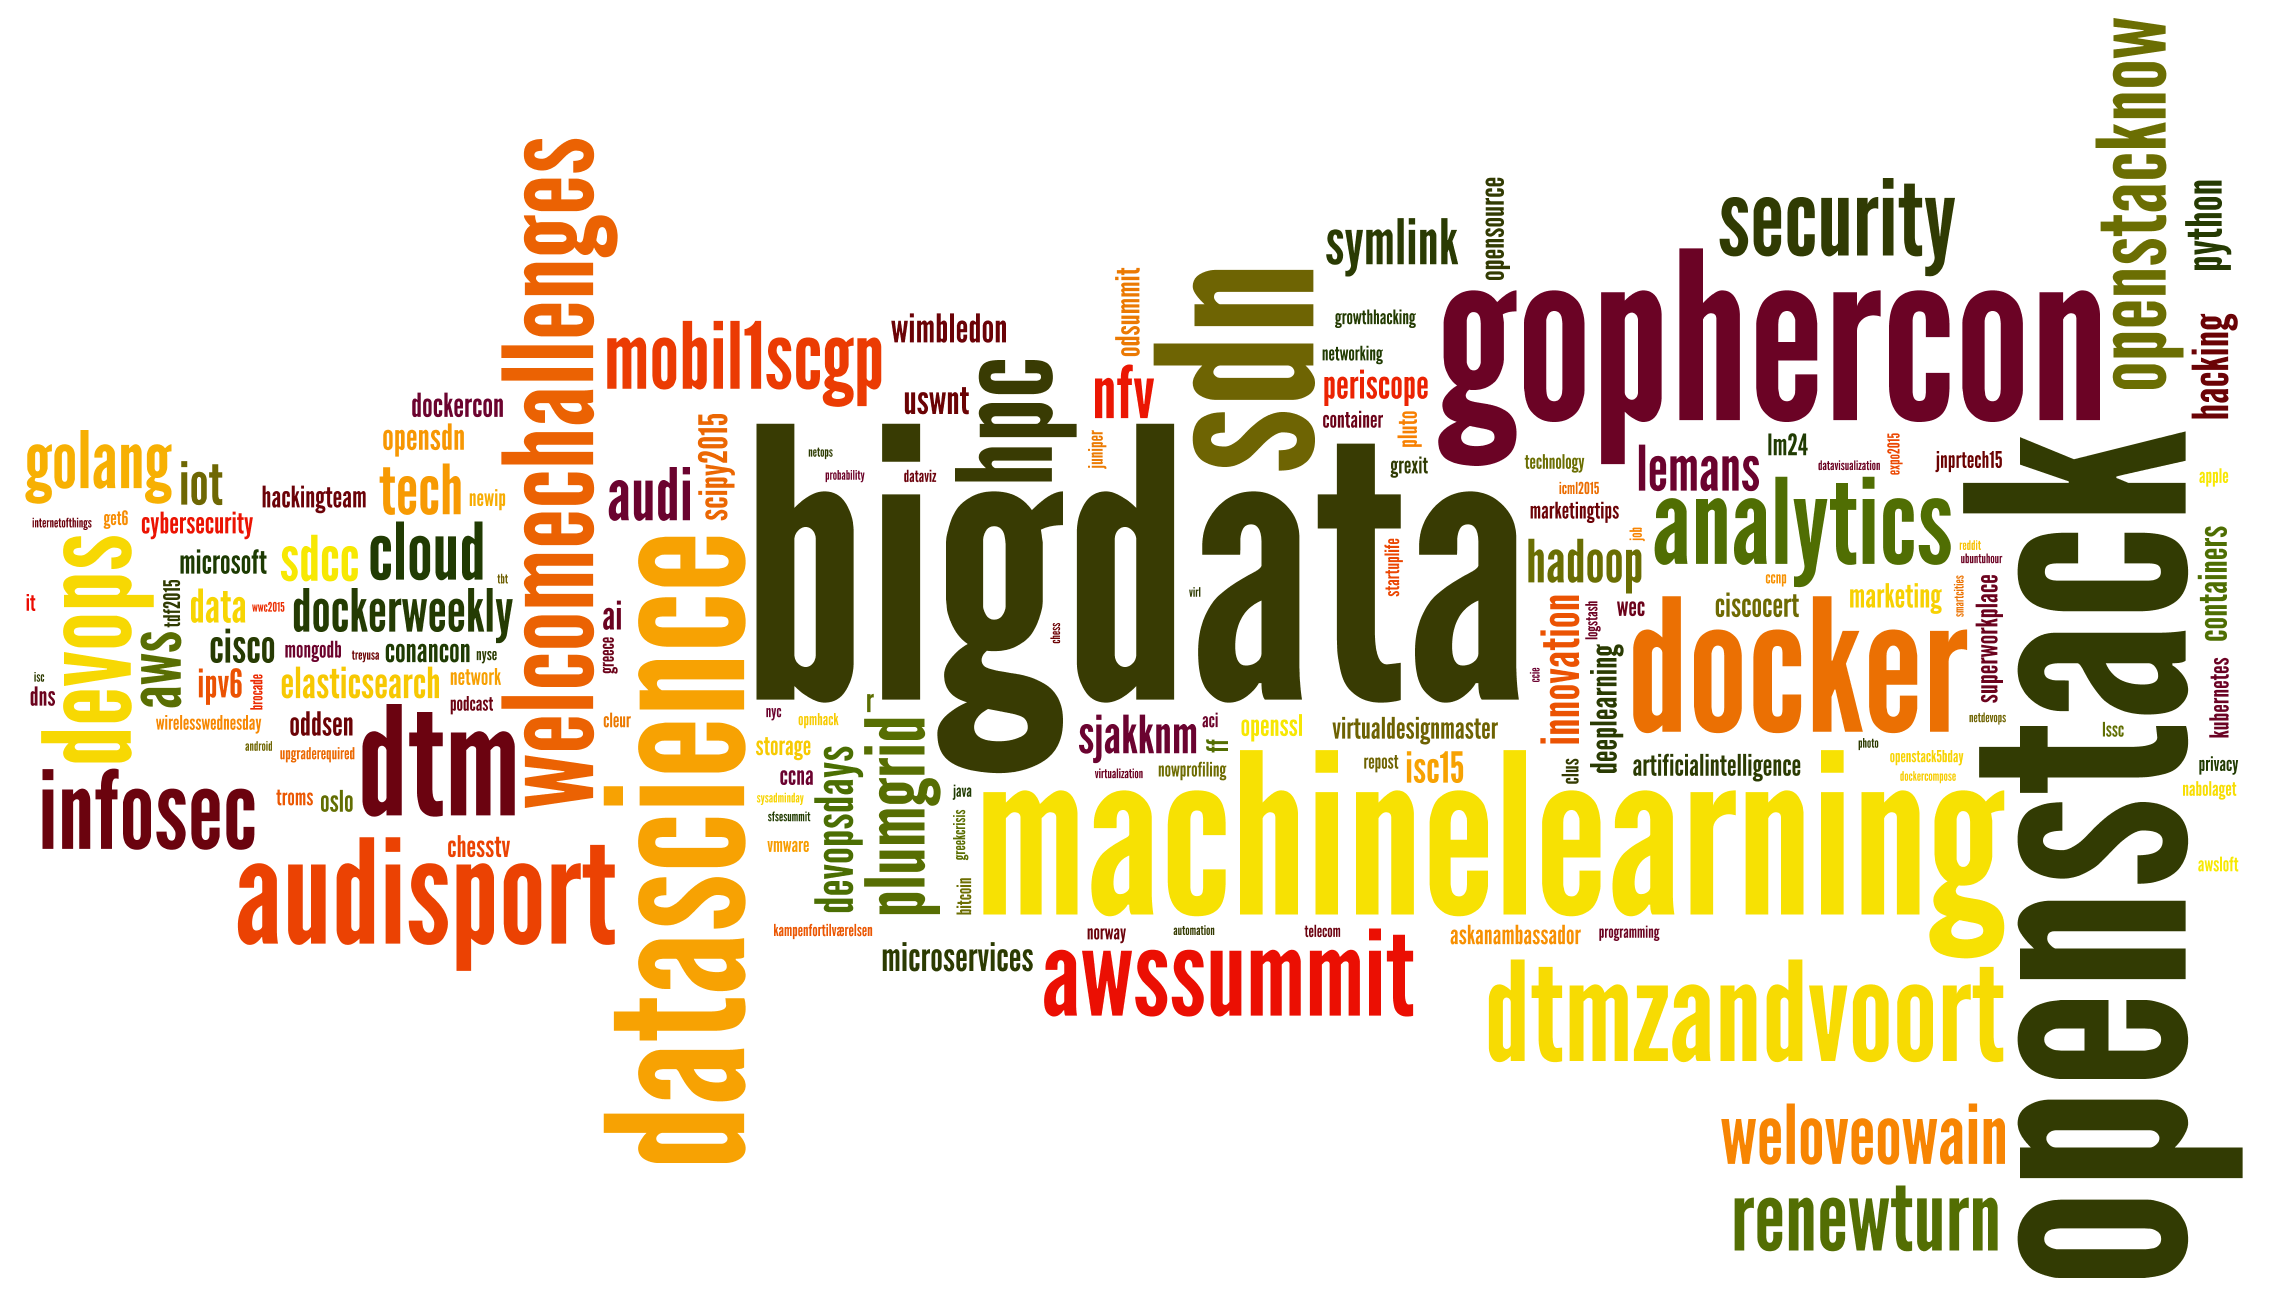 Word cloud of Twitter hashtags